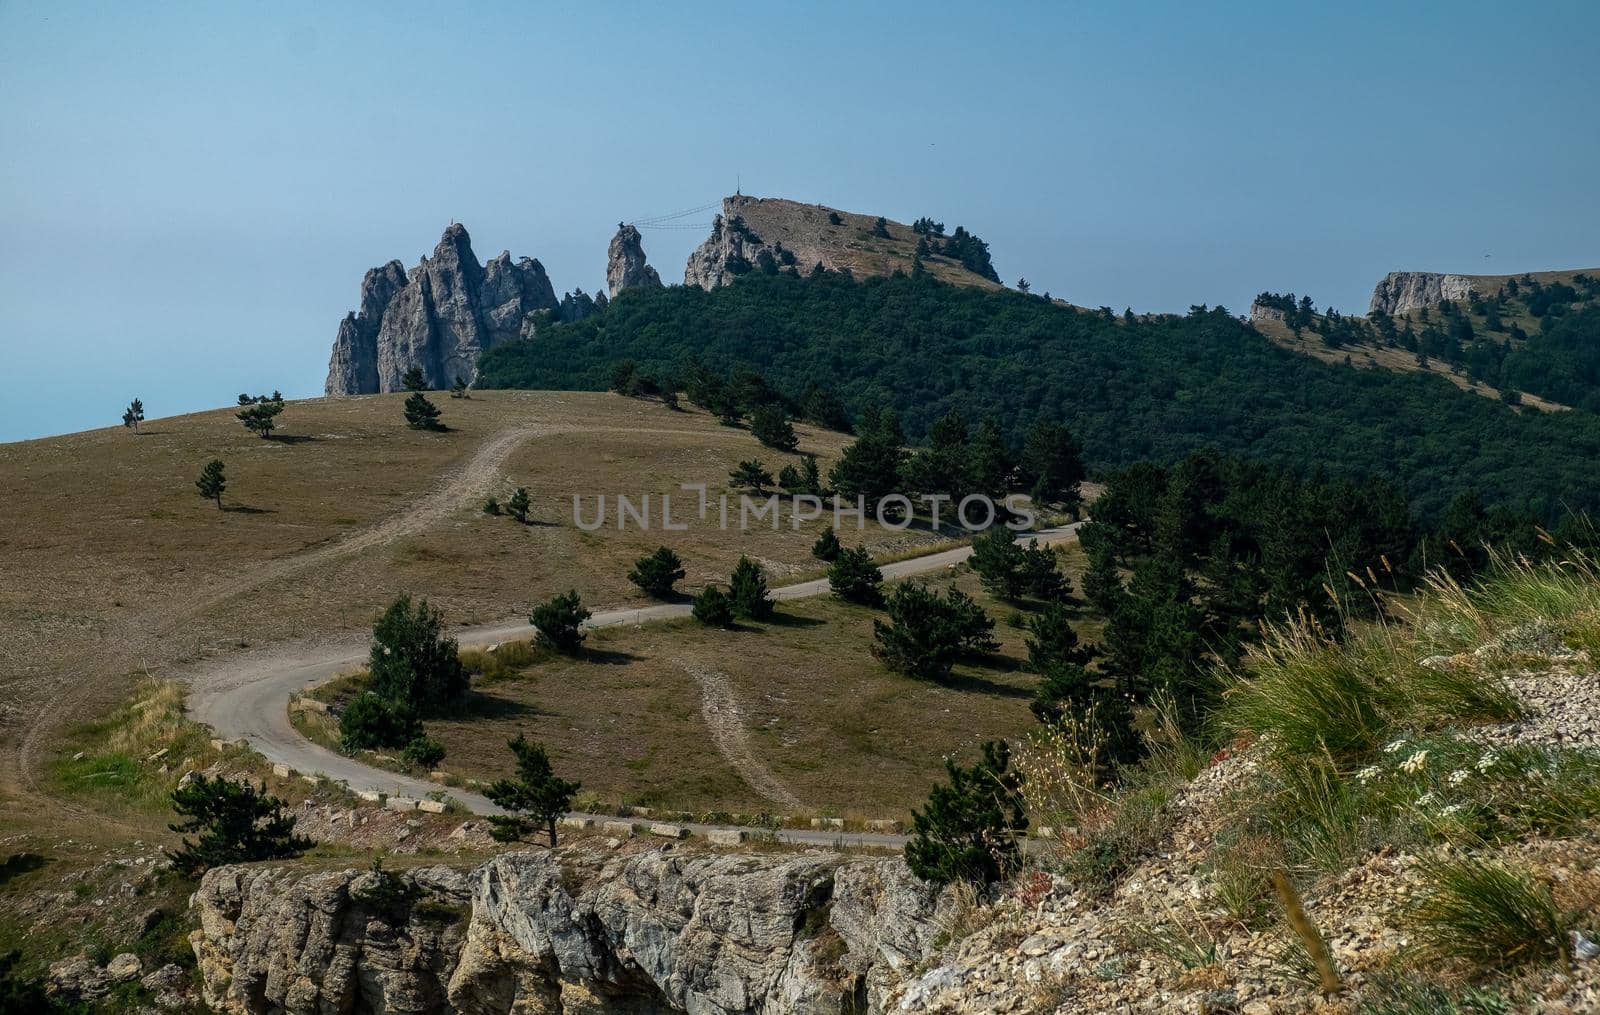 View of the road to the foot of the Ai-Petri mountain in Crimea.